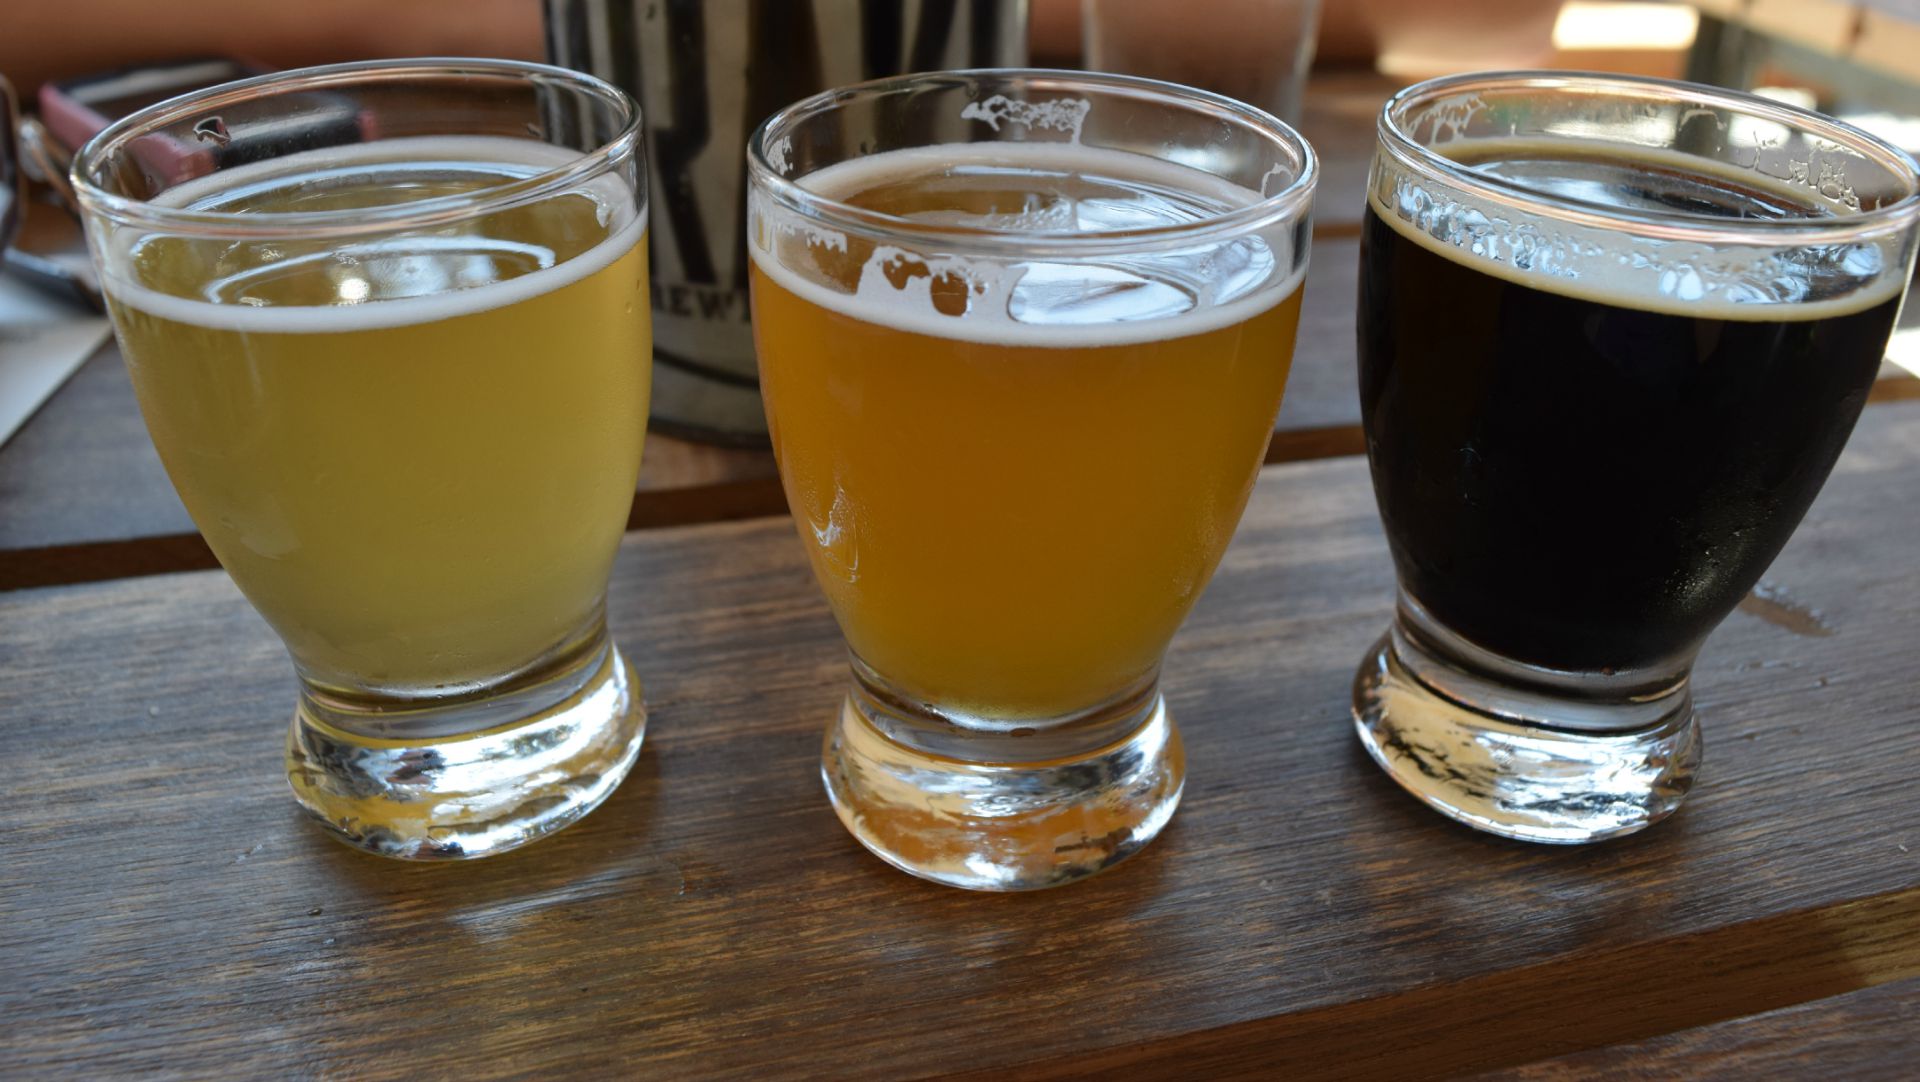 Left to right: Oaklander Weisse, Aroma Paloma, Black Robusto